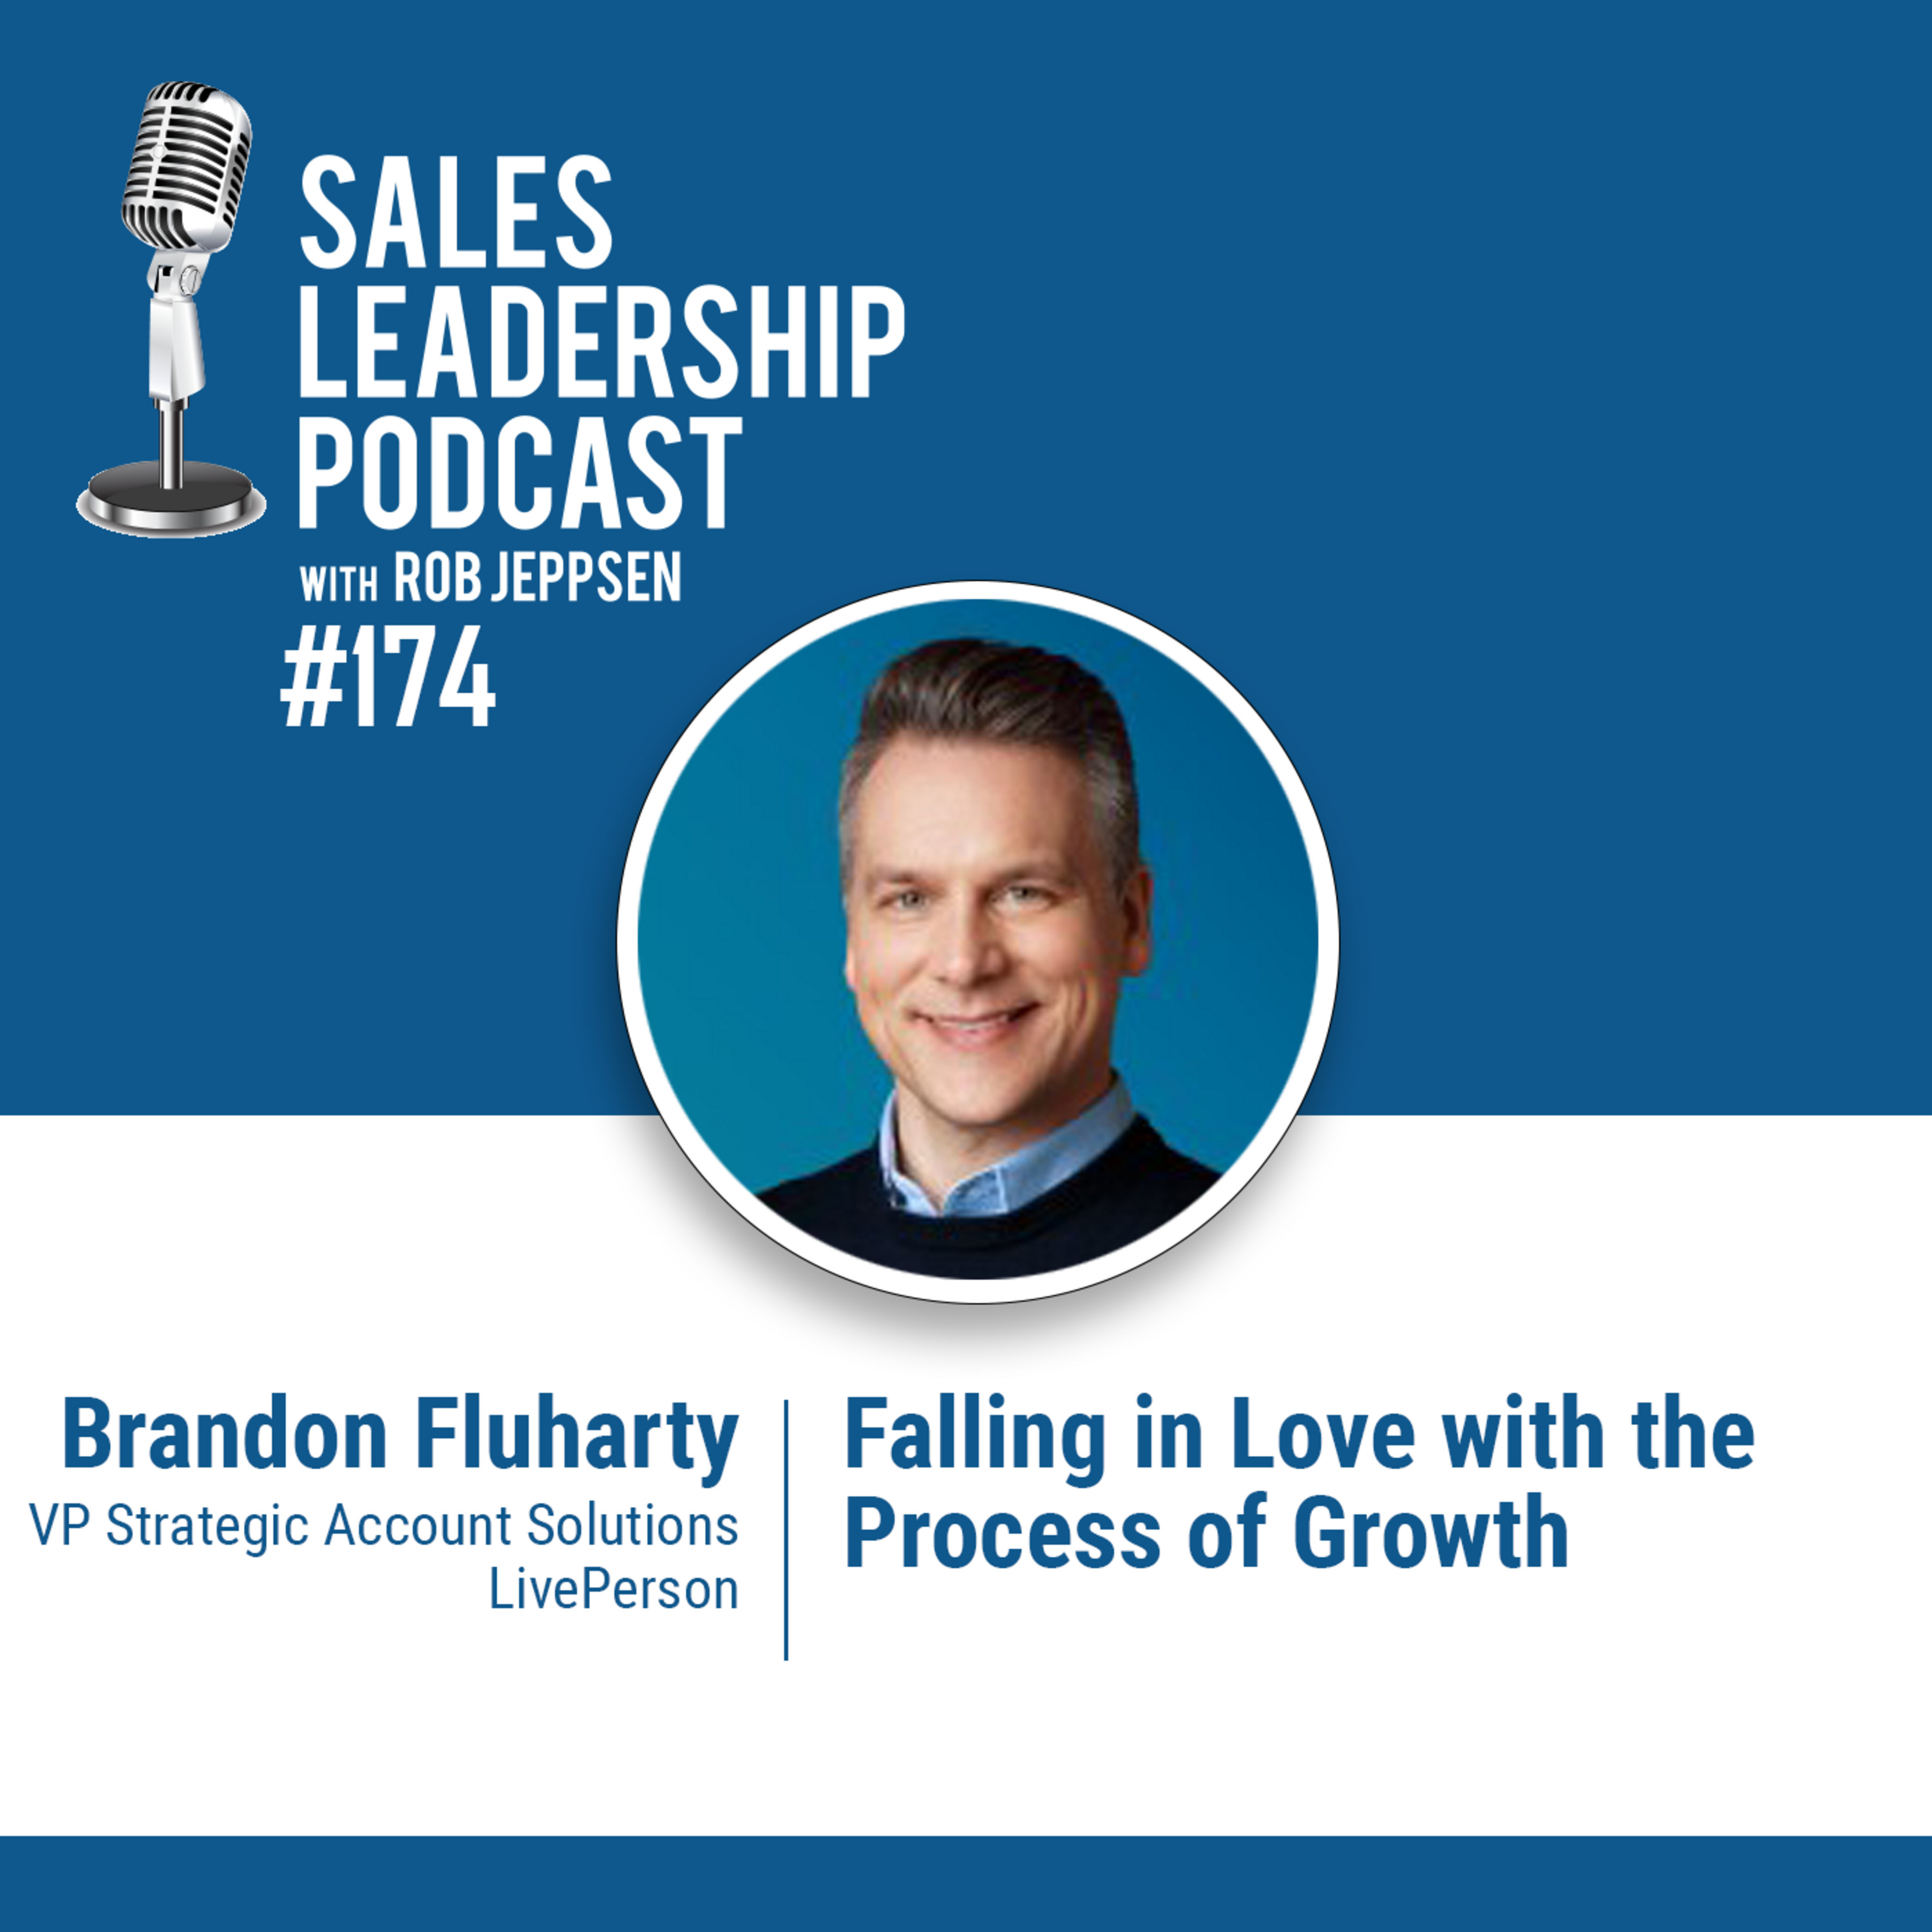 Episode 175: #174: Brandon Fluharty of LivePerson — Falling in Love with the Process of Growth